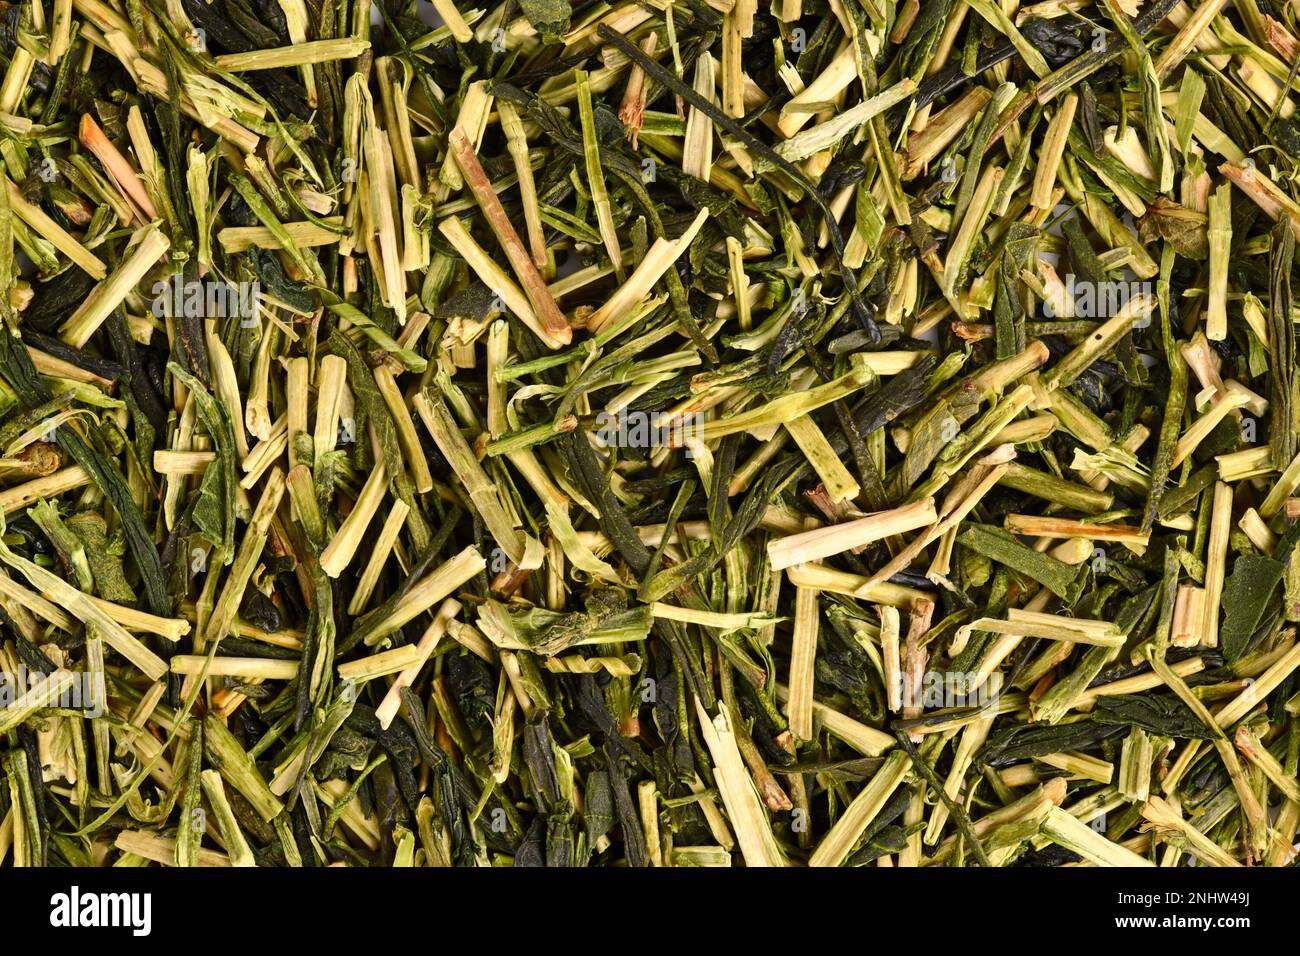 Close up of Japanese green twig tea herbs called 'Kukicha' made out of Camellia plant Stock Photo